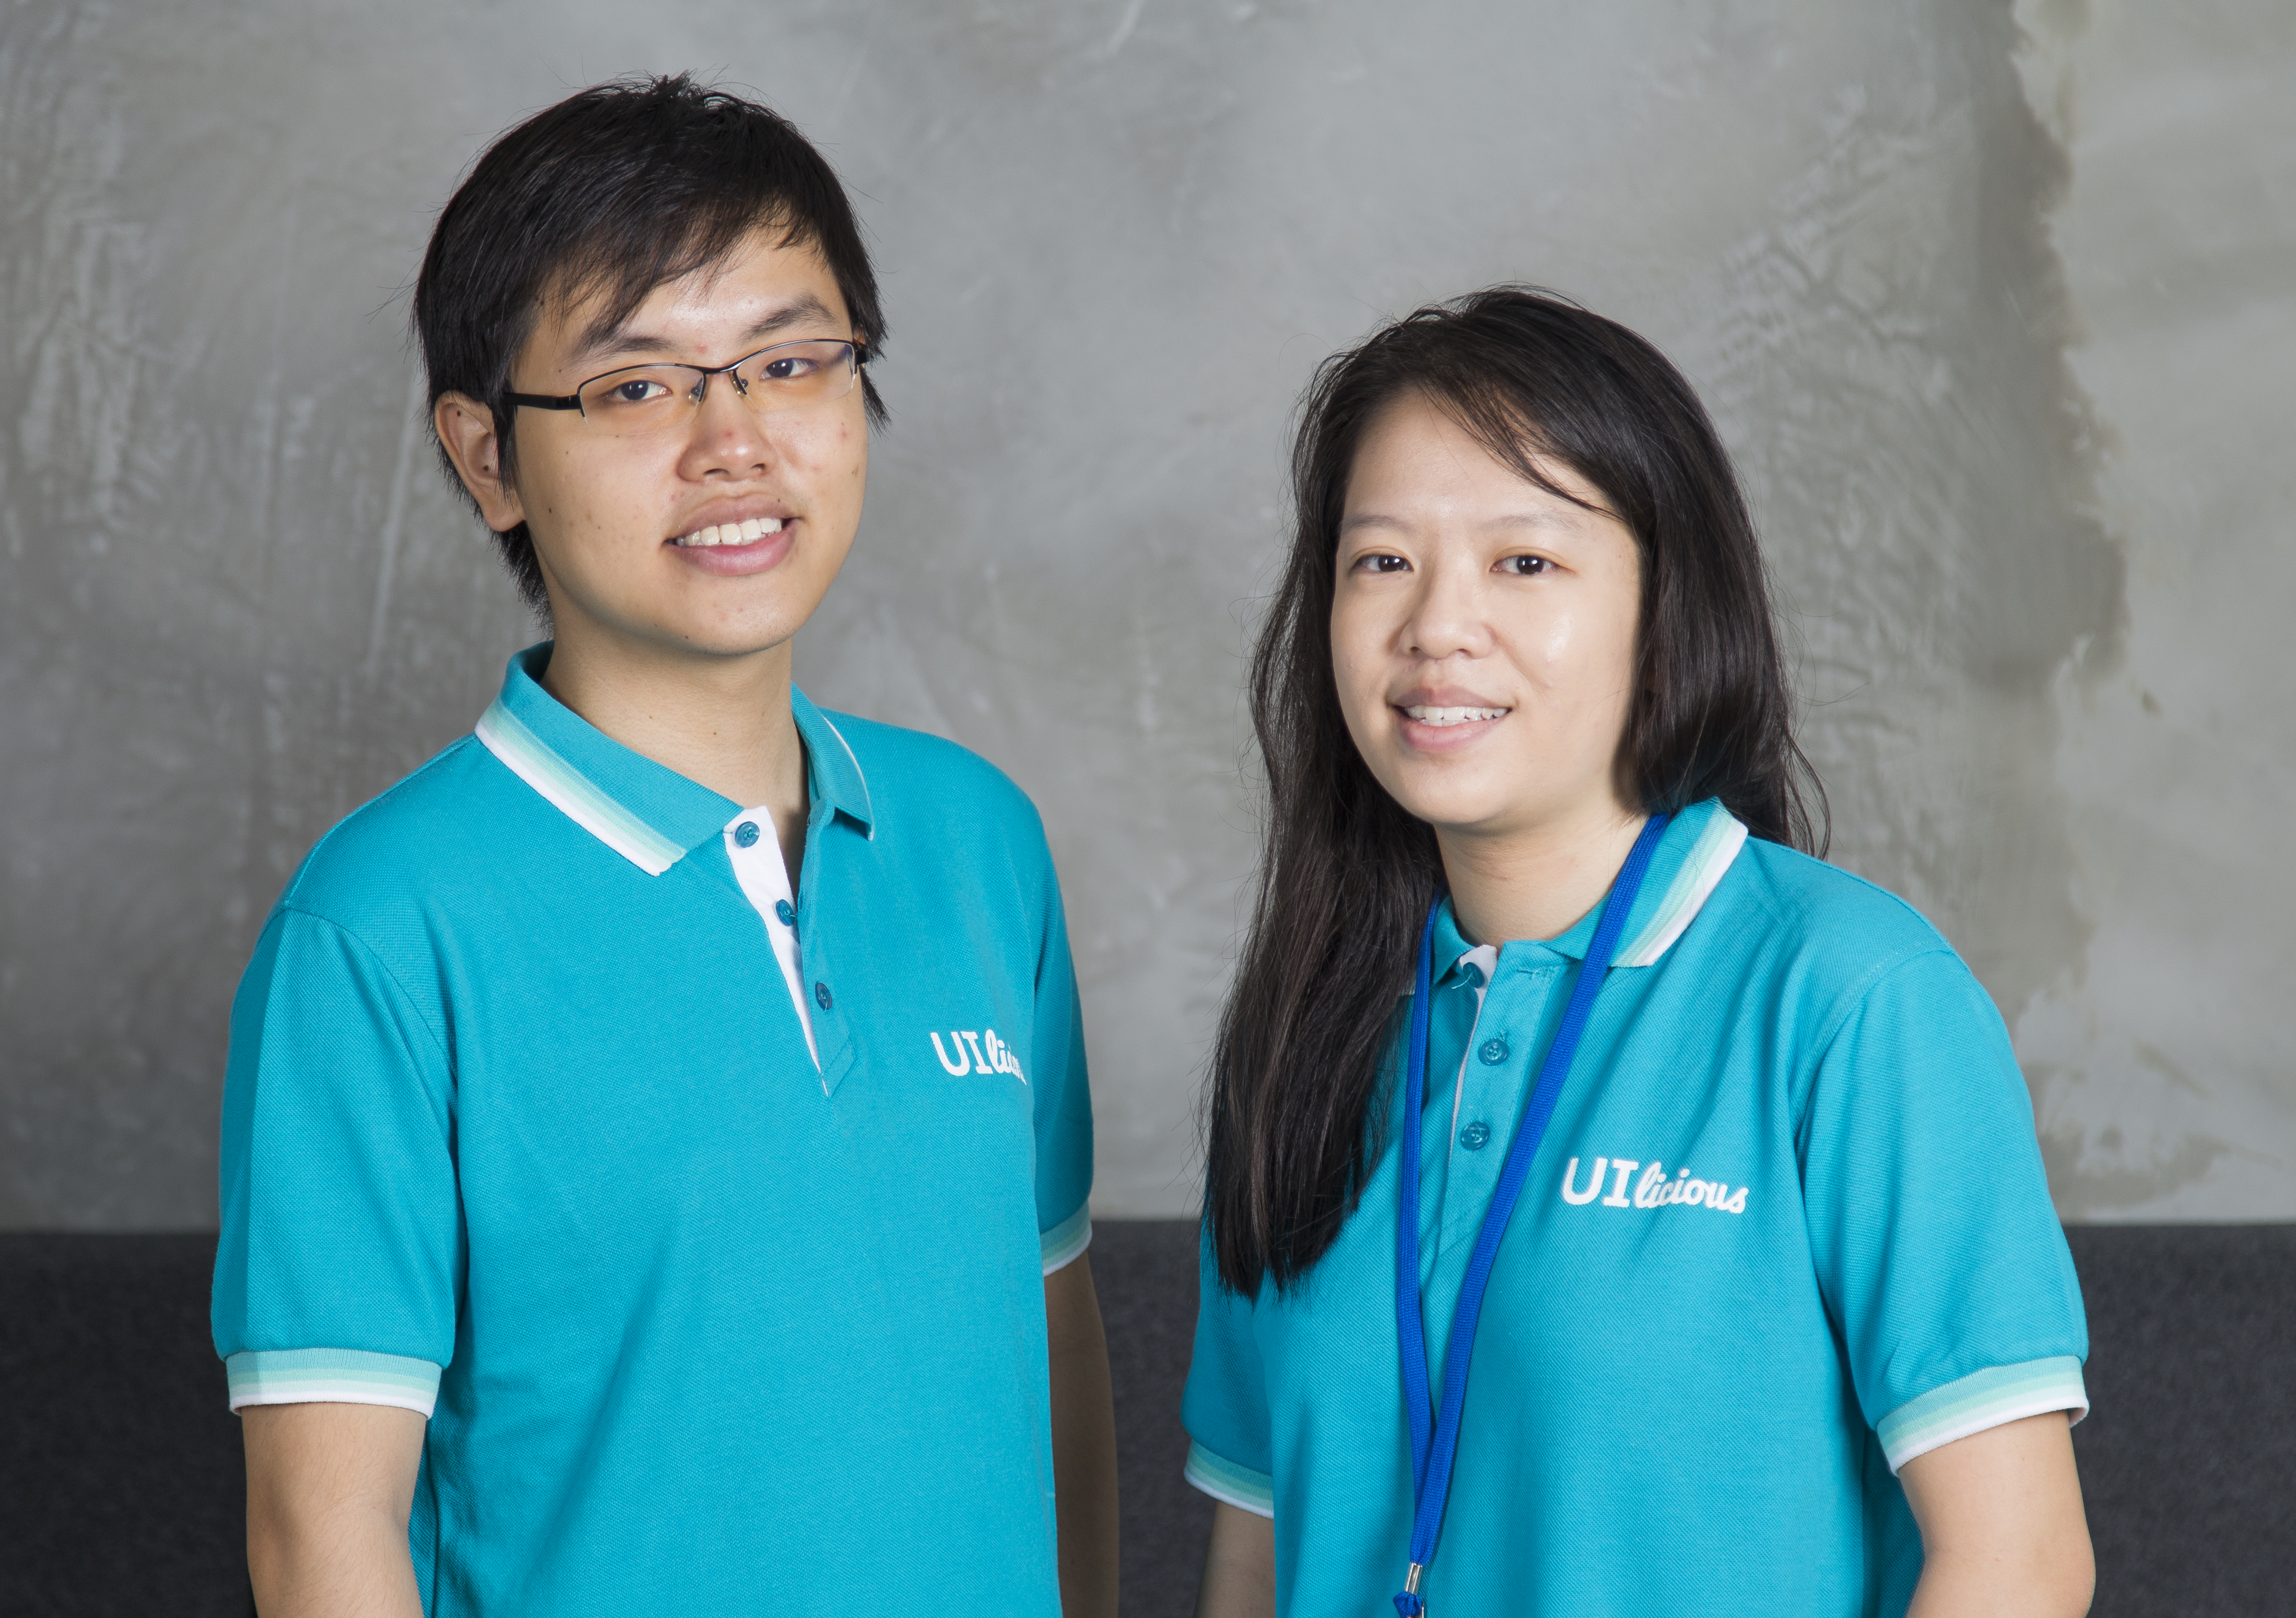 UI-licious’ co-founders, chief technology officer Eugene Cheah (left) and chief executive officer Shi Ling Tai (right)